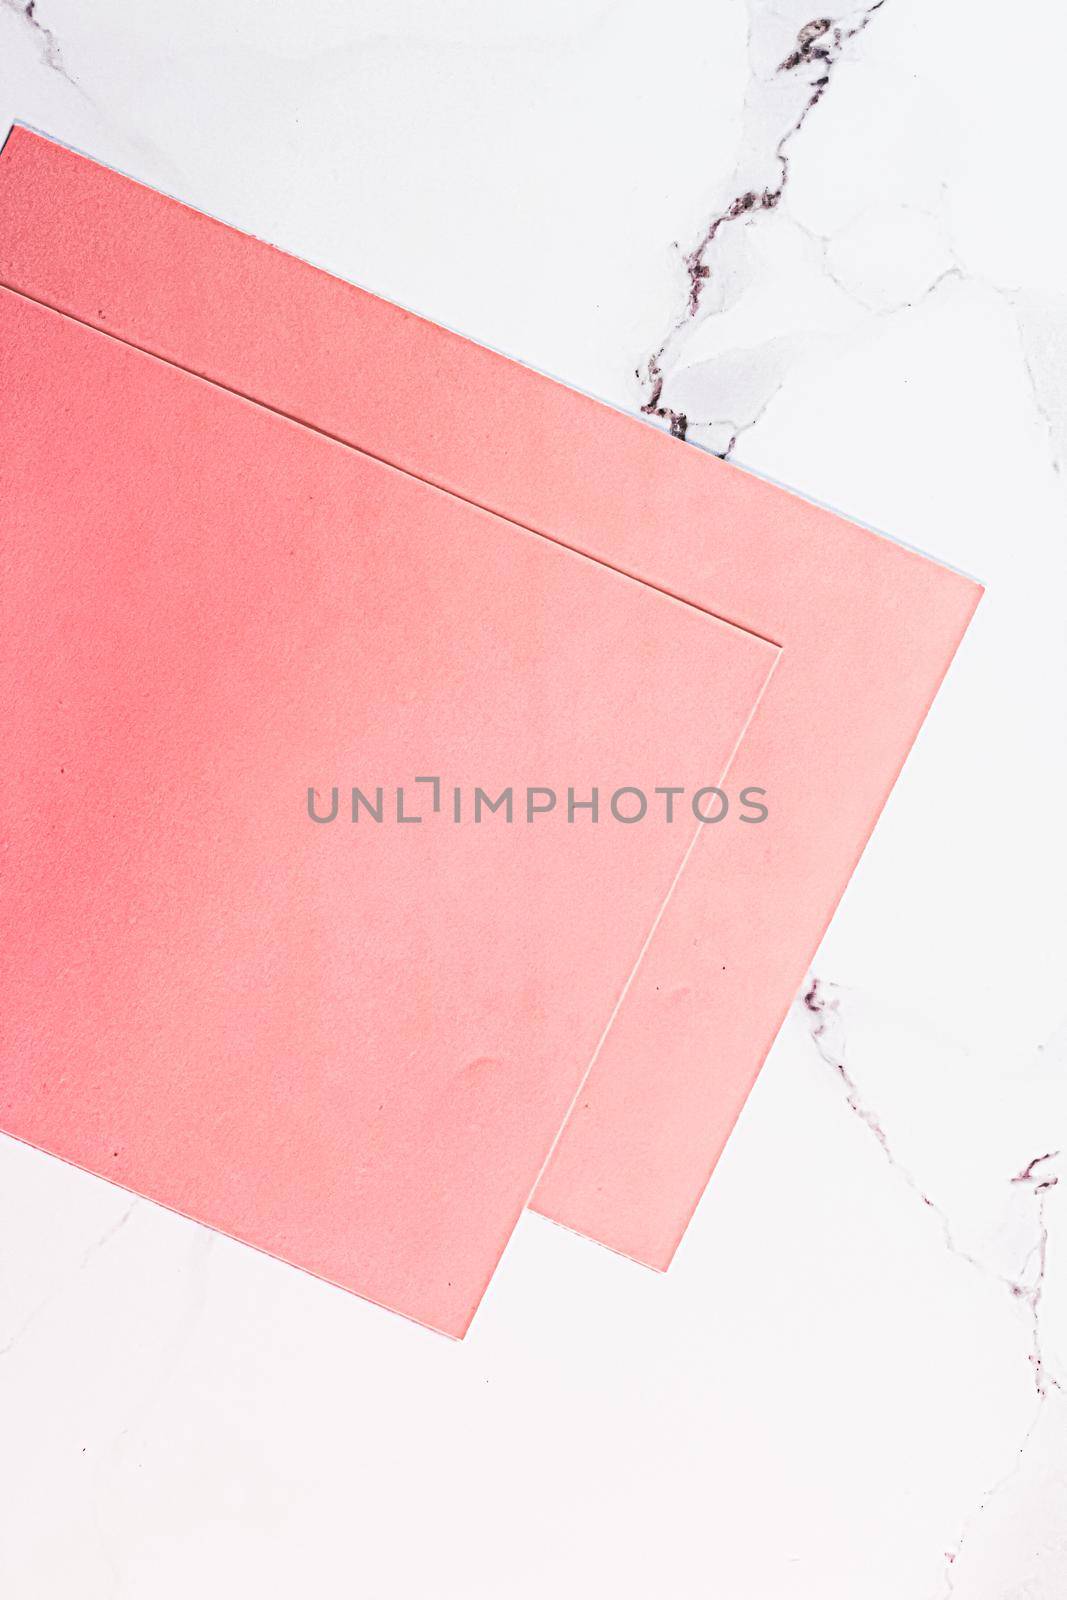 Pink A4 papers on white marble background as office stationery flatlay, luxury branding flat lay and brand identity design for mockups